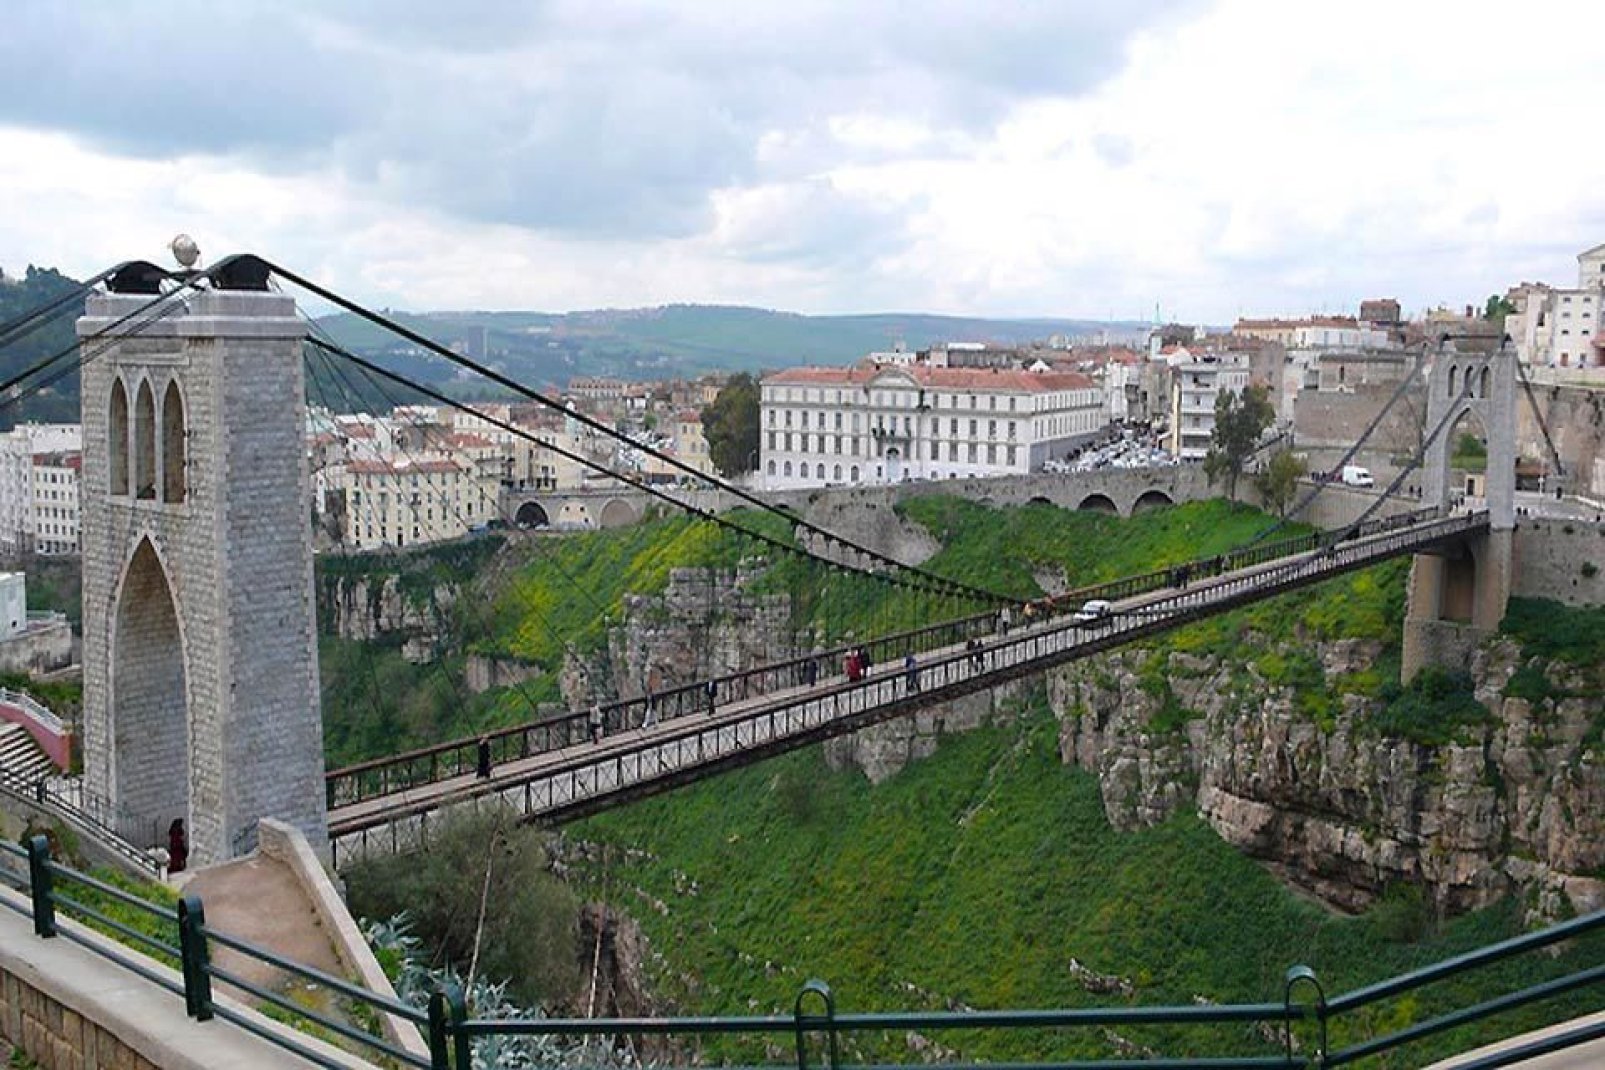 This suspended bridge spans the gorges 175m above the Rhumel river.